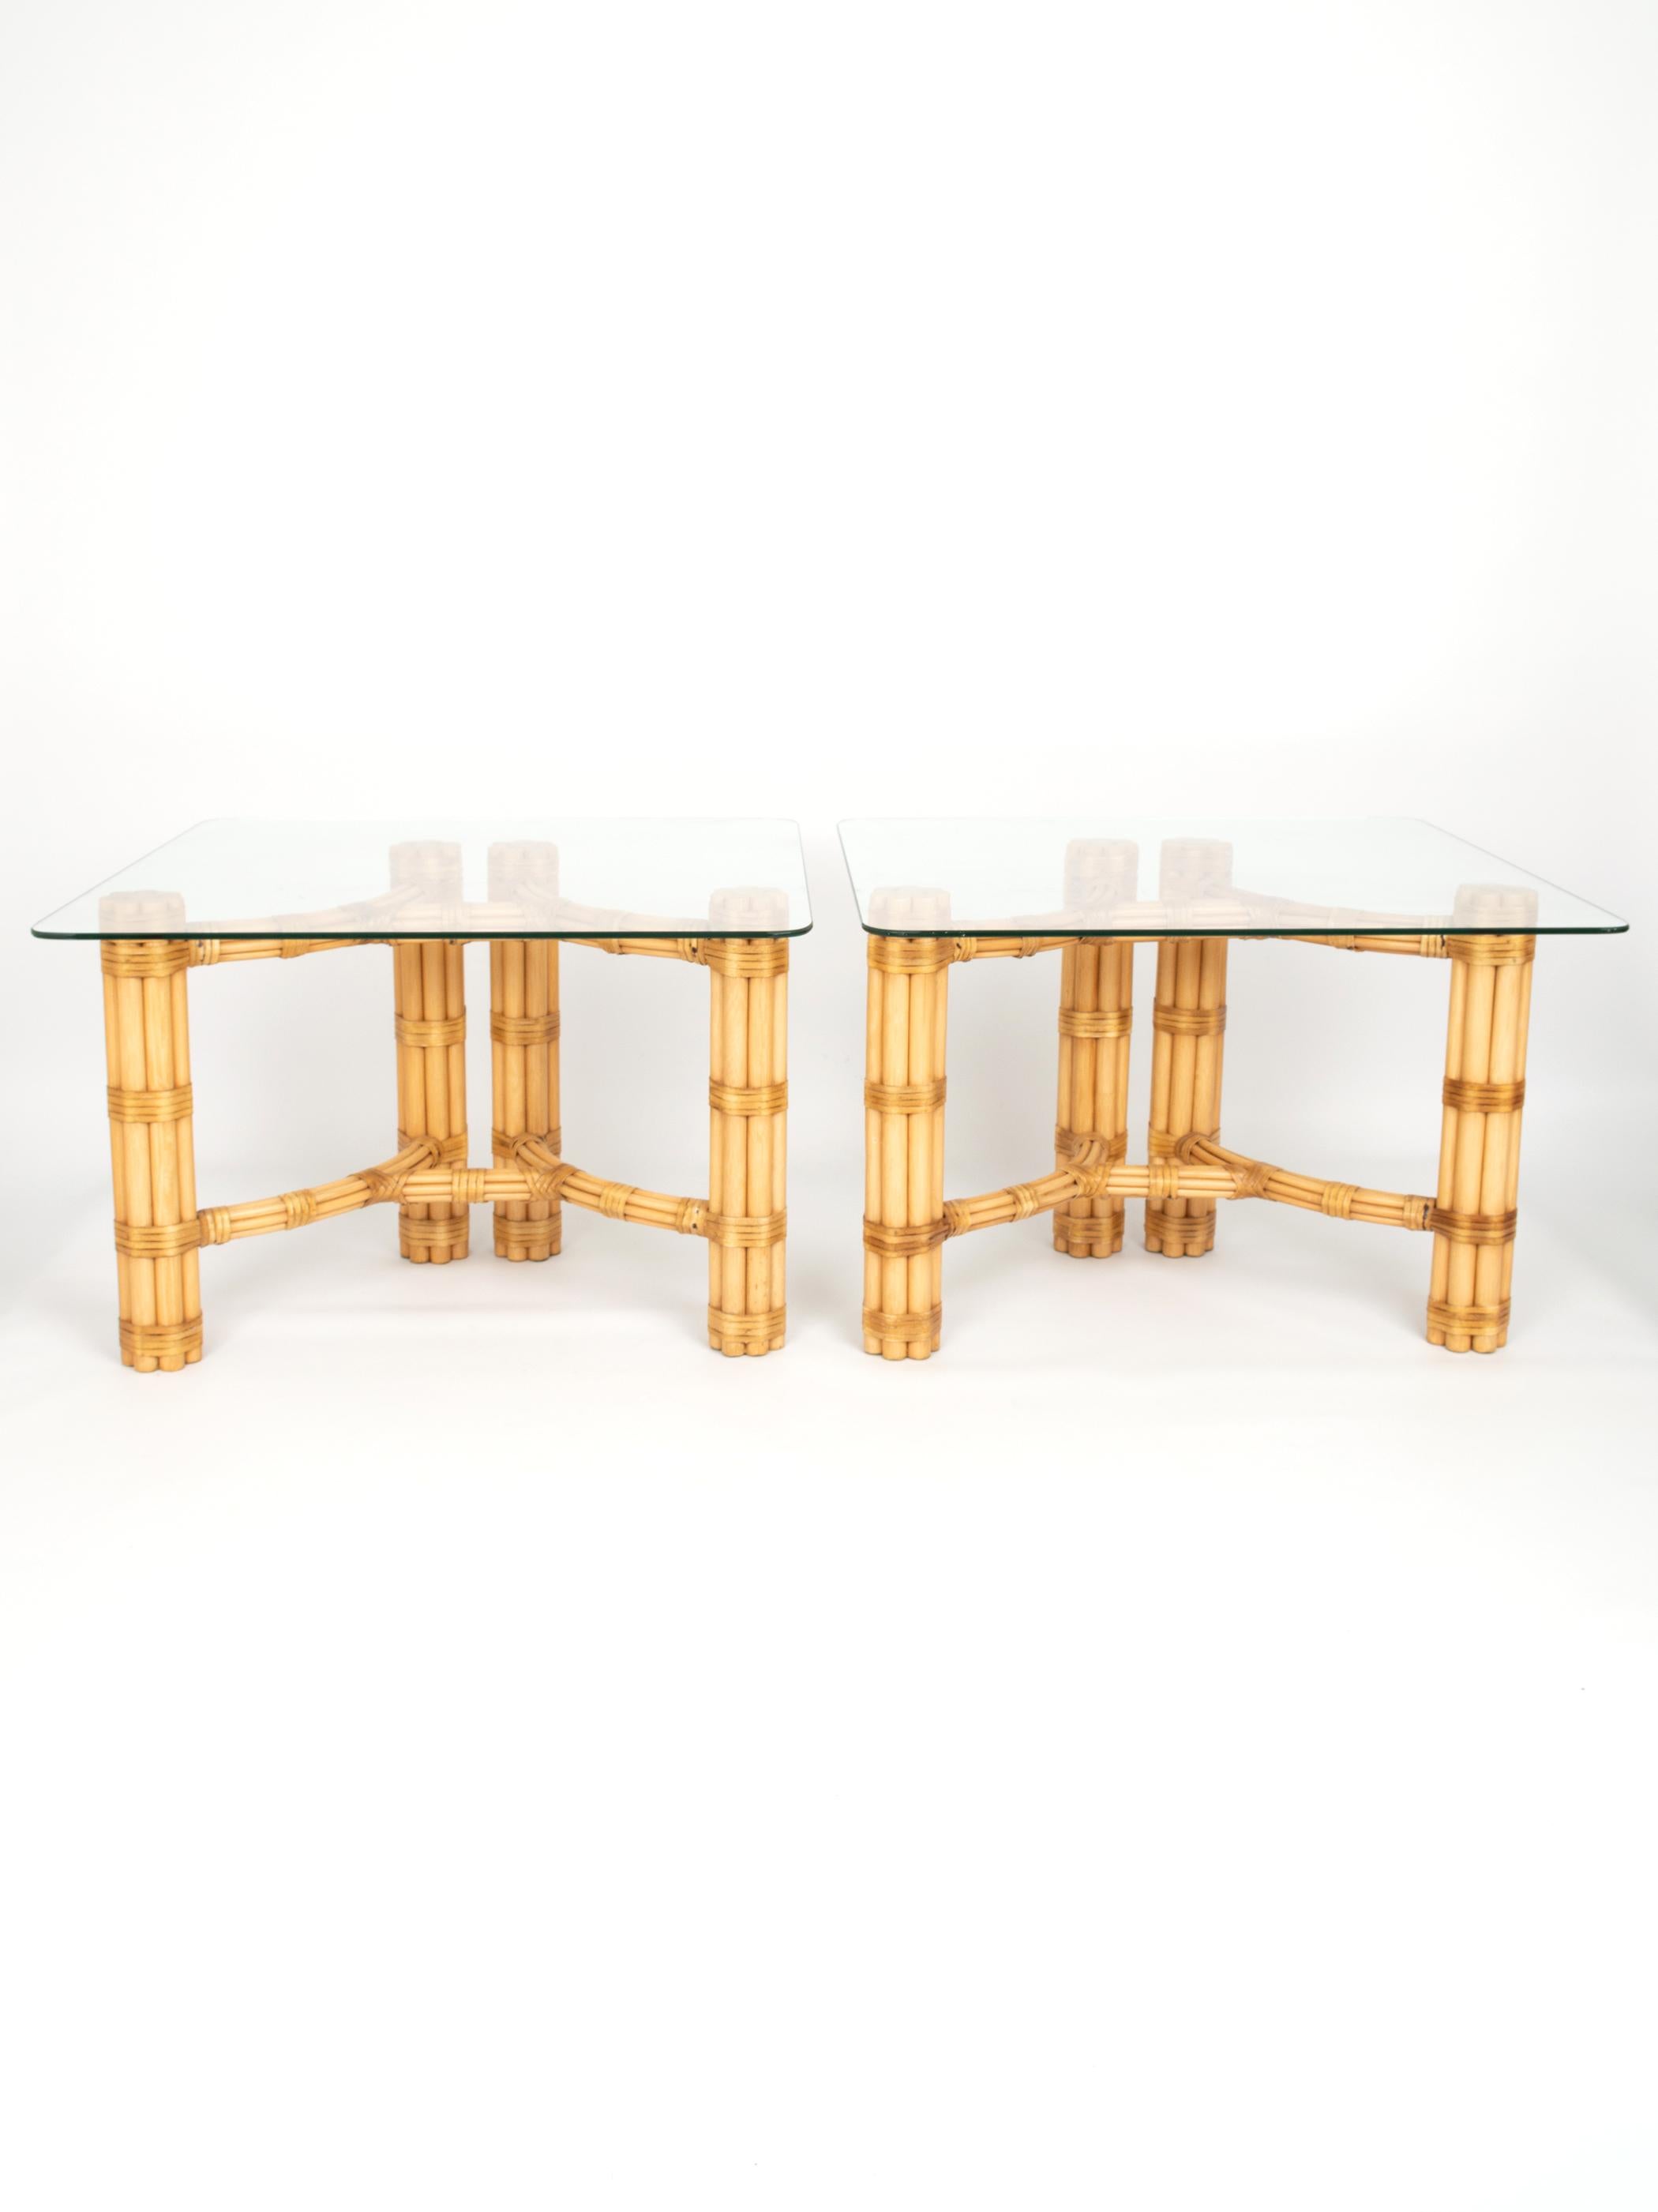 A pair of Mid-Century Modern Italian bamboo and glass end tables by Dal Vera C.1960.
In excellent condition.